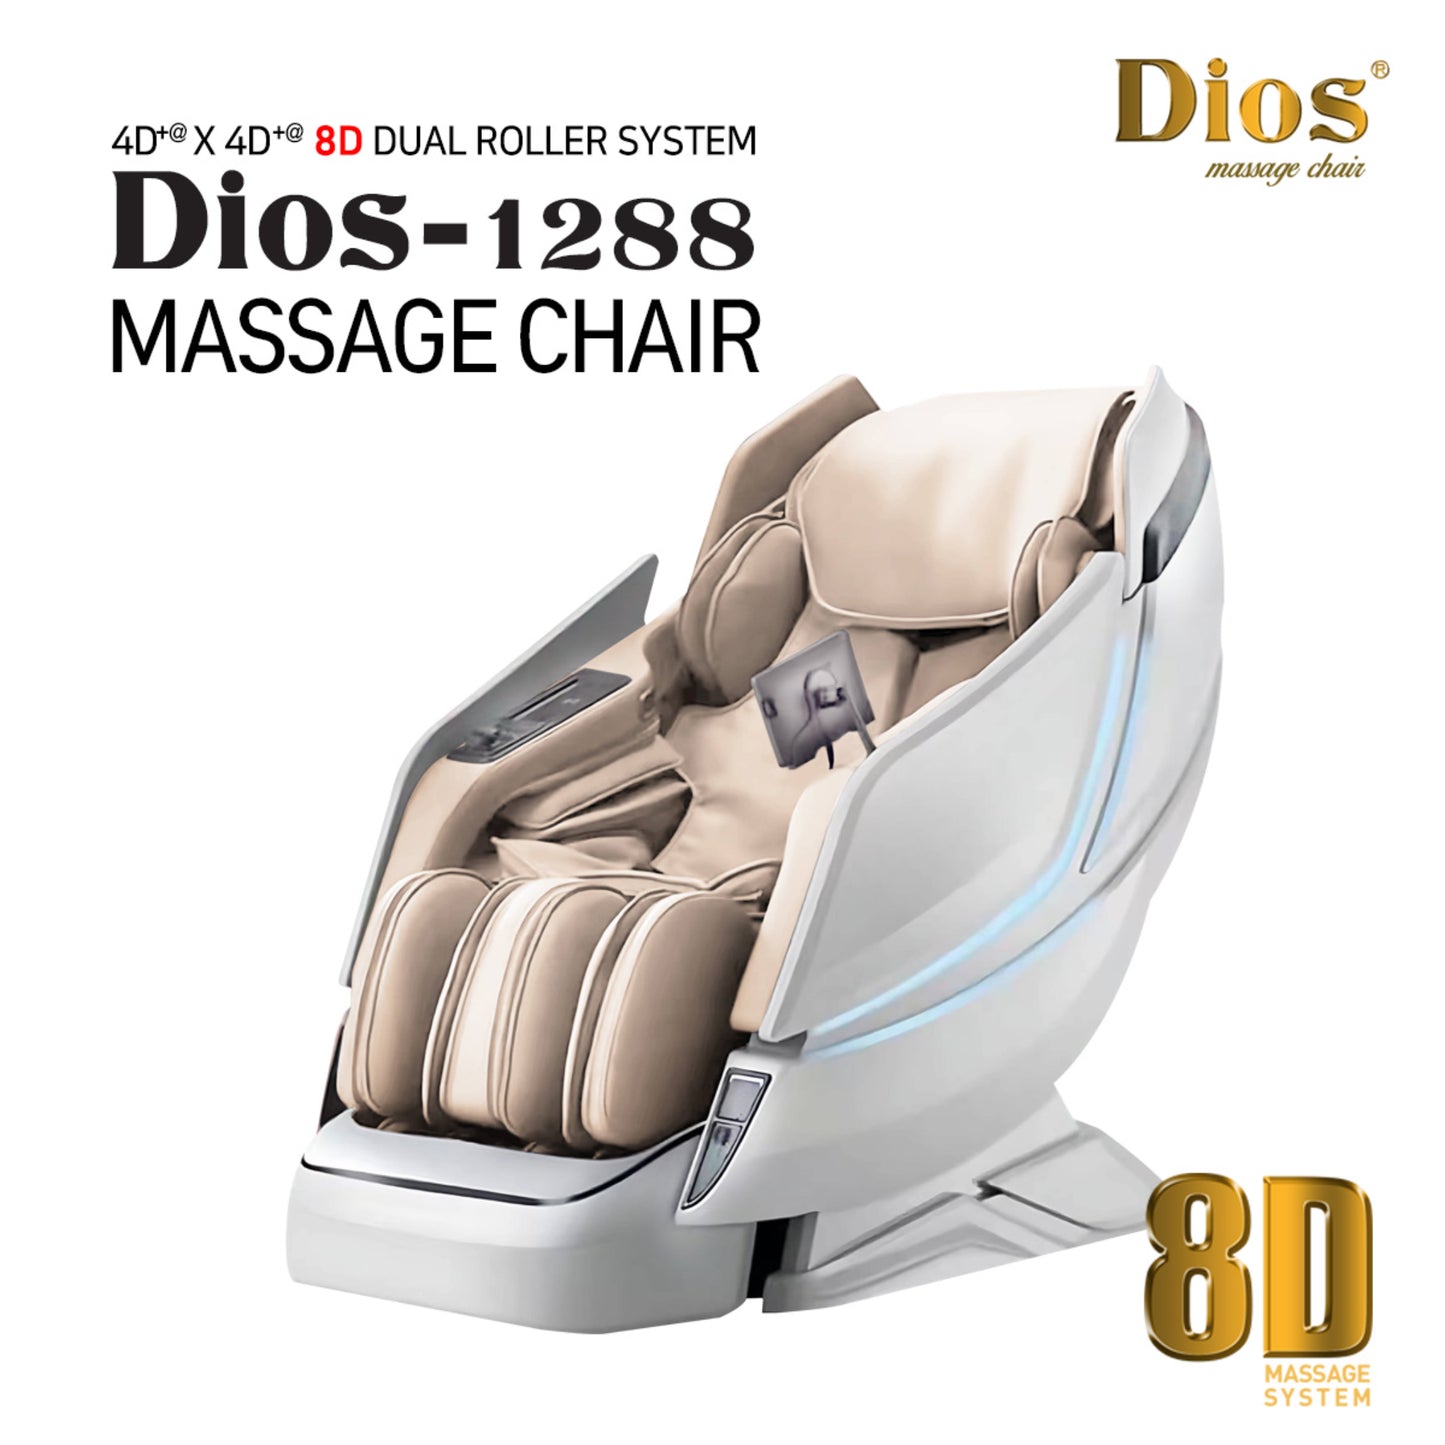 Kahuna Dios Massage Chair 8D AI Dual Air Tech Touch Roller SL-track with Brain Relaxation Program Dios-1288 - White